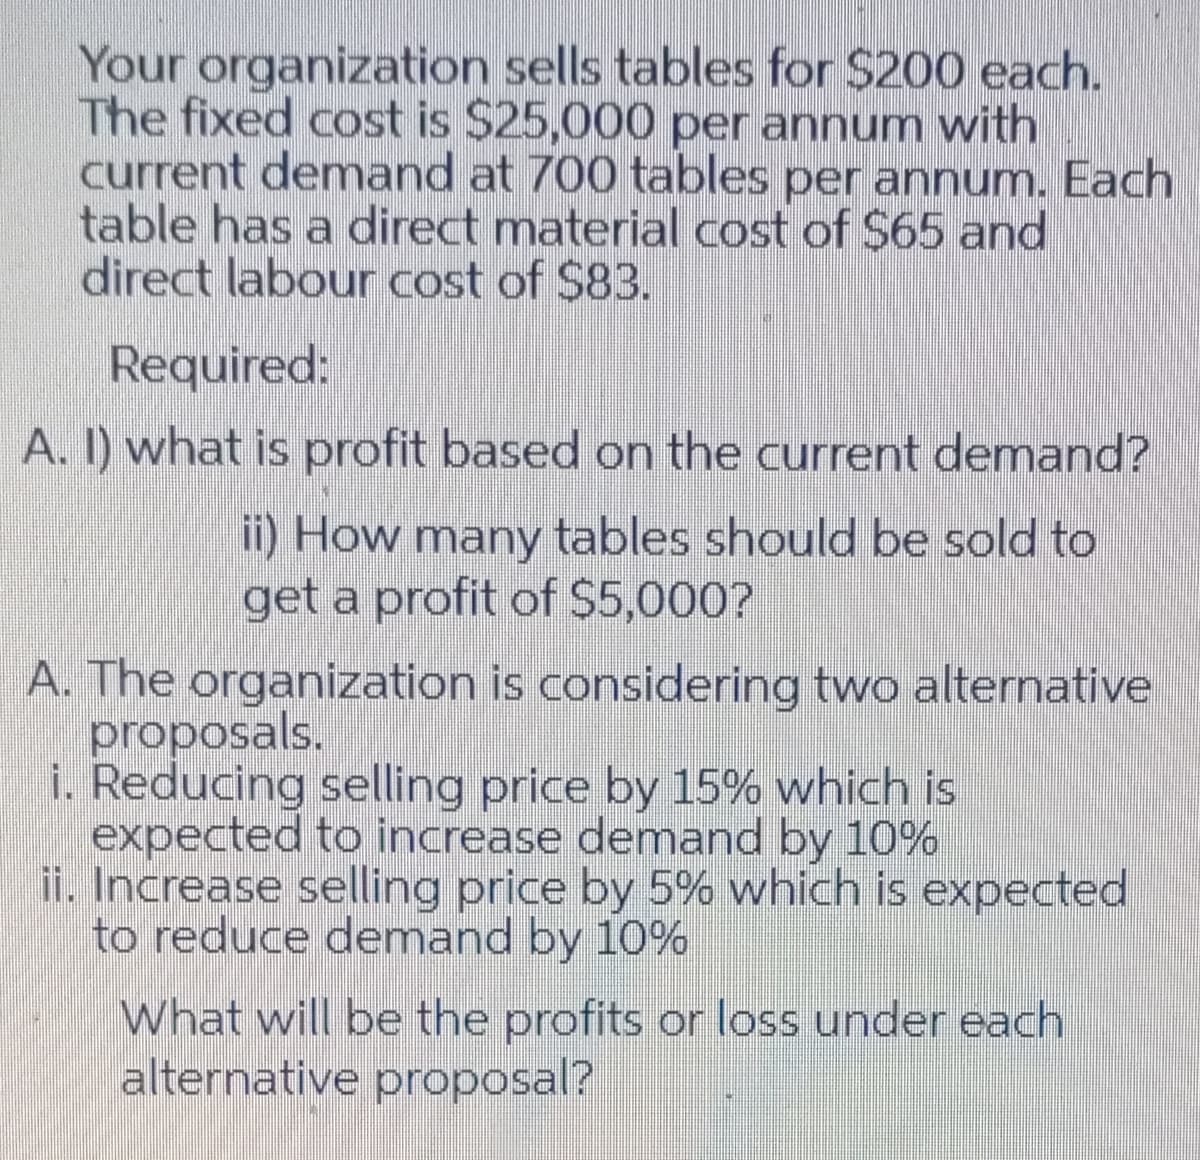 Your organization sells tables for $200 each.
The fixed cost is $25,000 per annum with
current demand at 700 tables per annum. Each
table has a direct material cost of $65 and
direct labour cost of $83.
Required:
A. I) what is profit based on the current demand?
i) How many tables should be sold to
get a profit of $5,000?
A. The organization is considering two alternative
proposals.
i. Reducing selling price by 15% which is
expected to increase demand by 10%
ii. Increase selling price by 5% which is expected
to reduce demand by 10%
What will be the profits or loss under each
alternative proposal?
